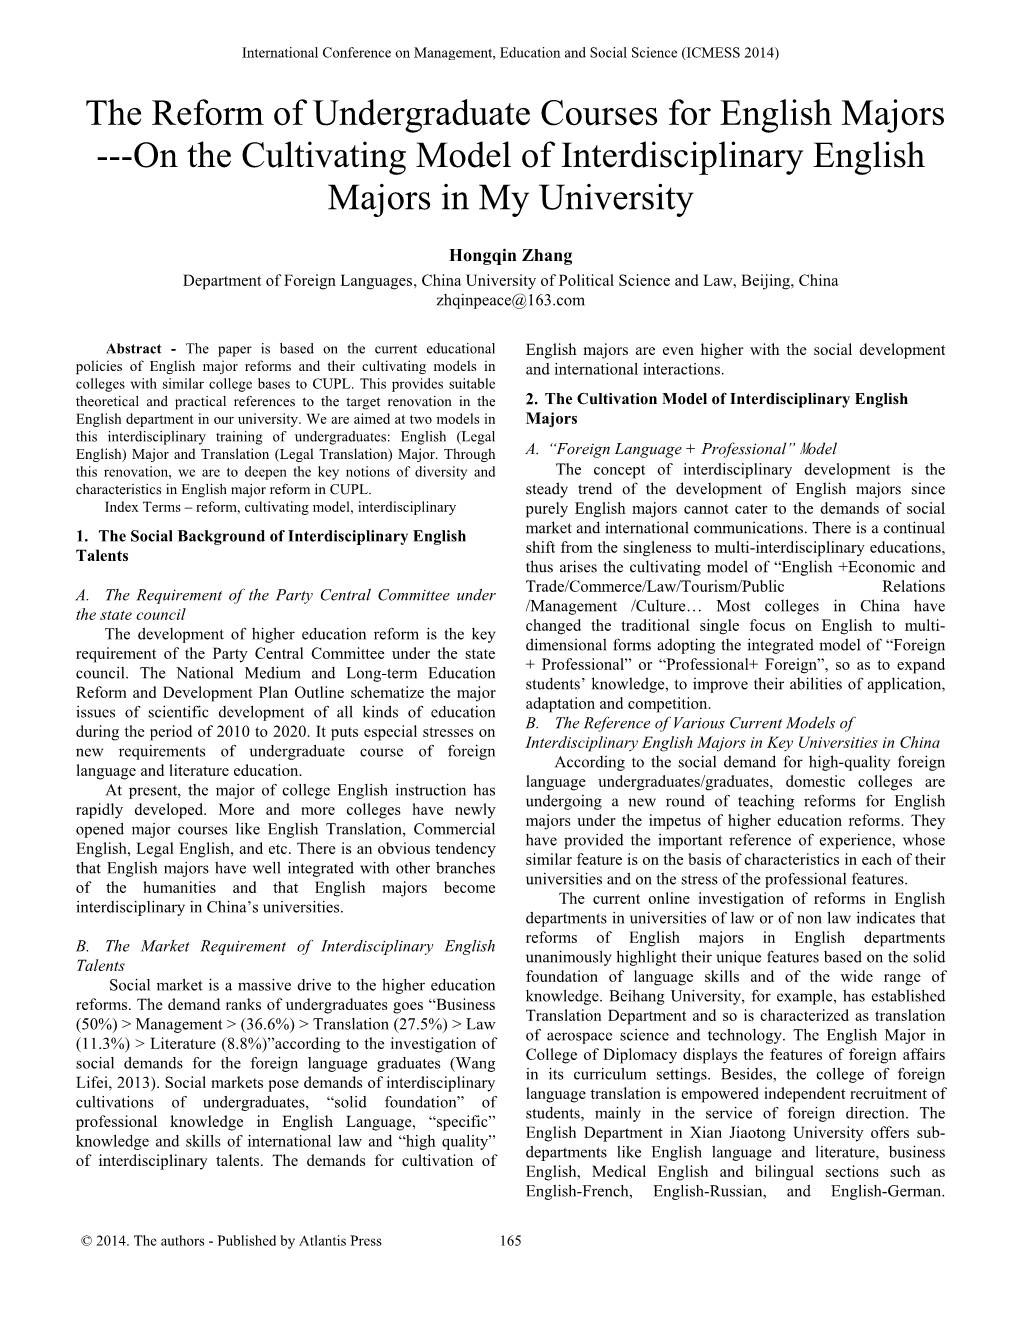 The Reform of Undergraduate Courses for English Majors ---On the Cultivating Model of Interdisciplinary English Majors in My University